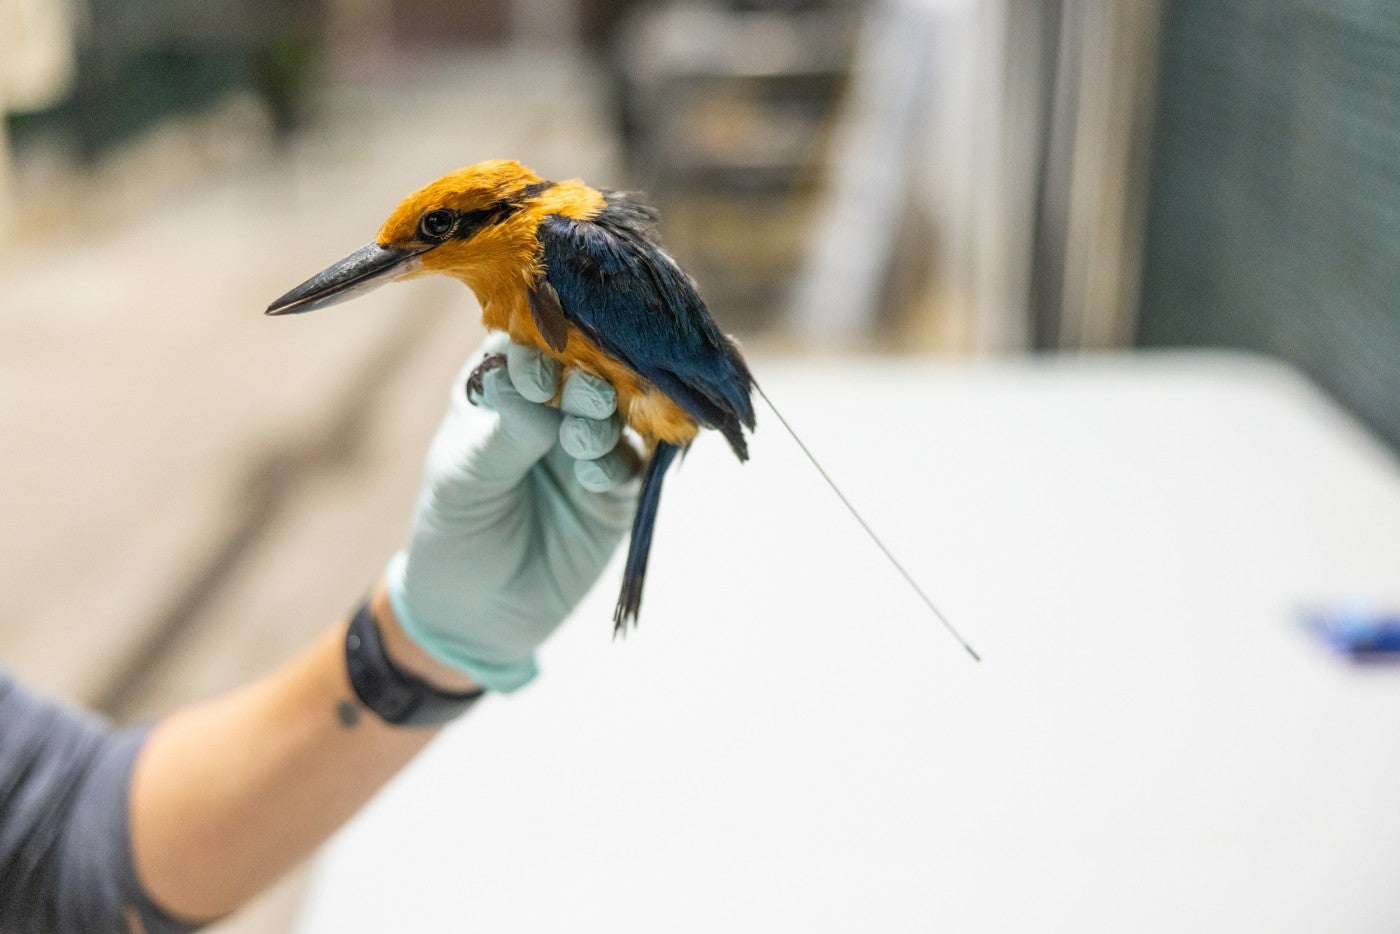 An animal keepers holds a Guam kingfisher bird in a gloved hand; the bird is wearing a GPS transmitter on its back